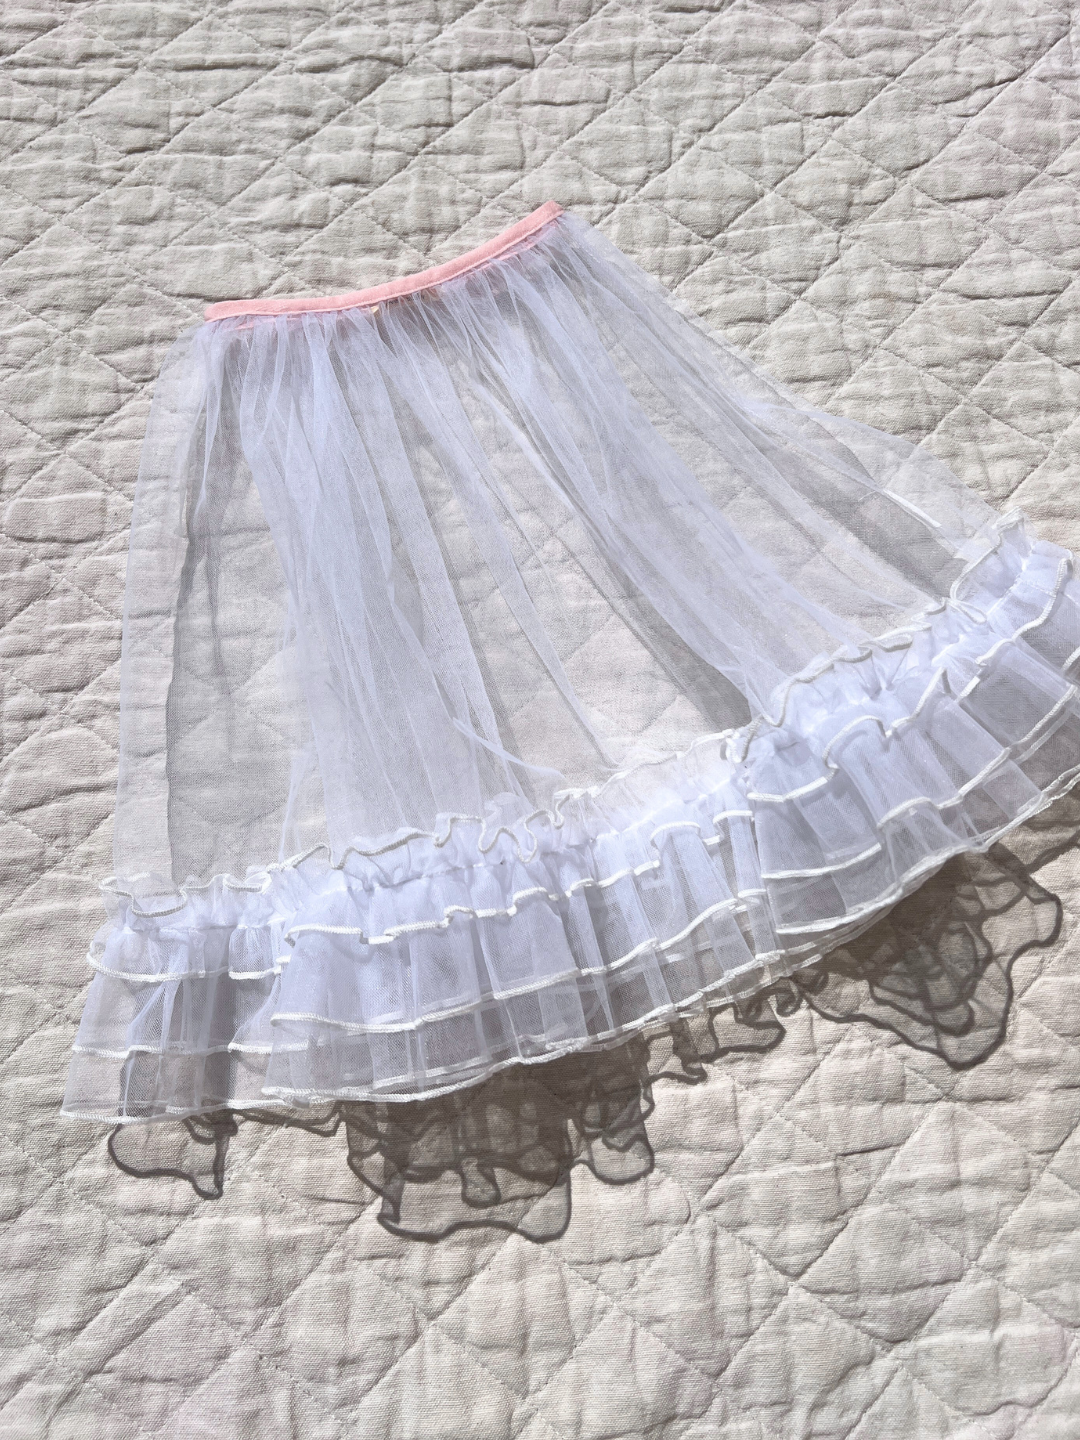 A front view of the kid's tulle layer skirt, white with a pink waistband, laying on an off-white cotton quilt.